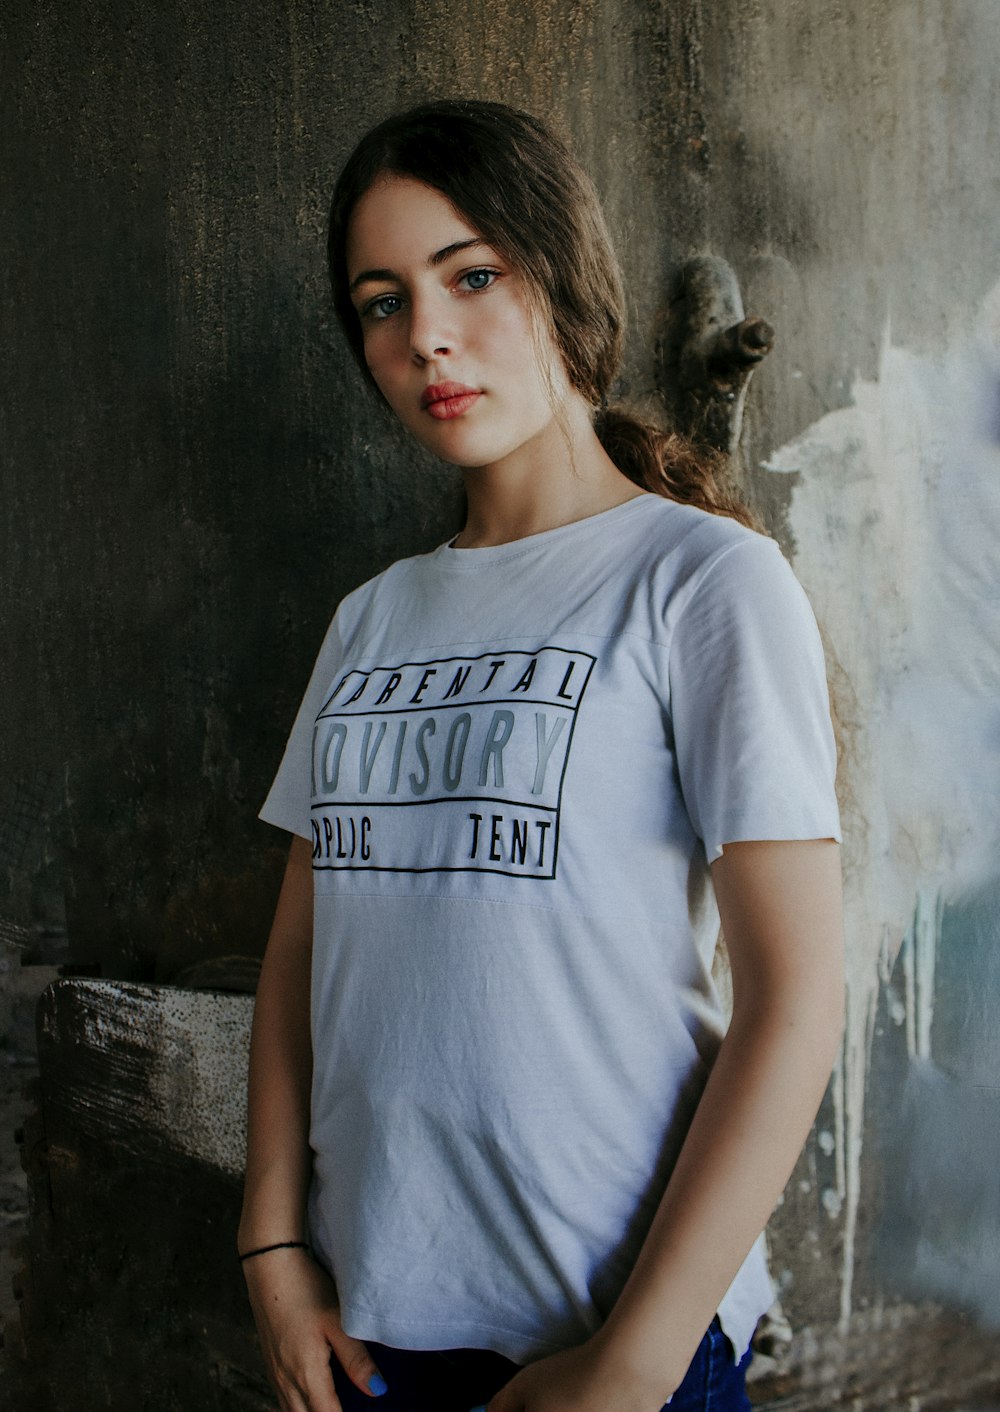 woman in white crew neck t-shirt standing beside gray concrete wall